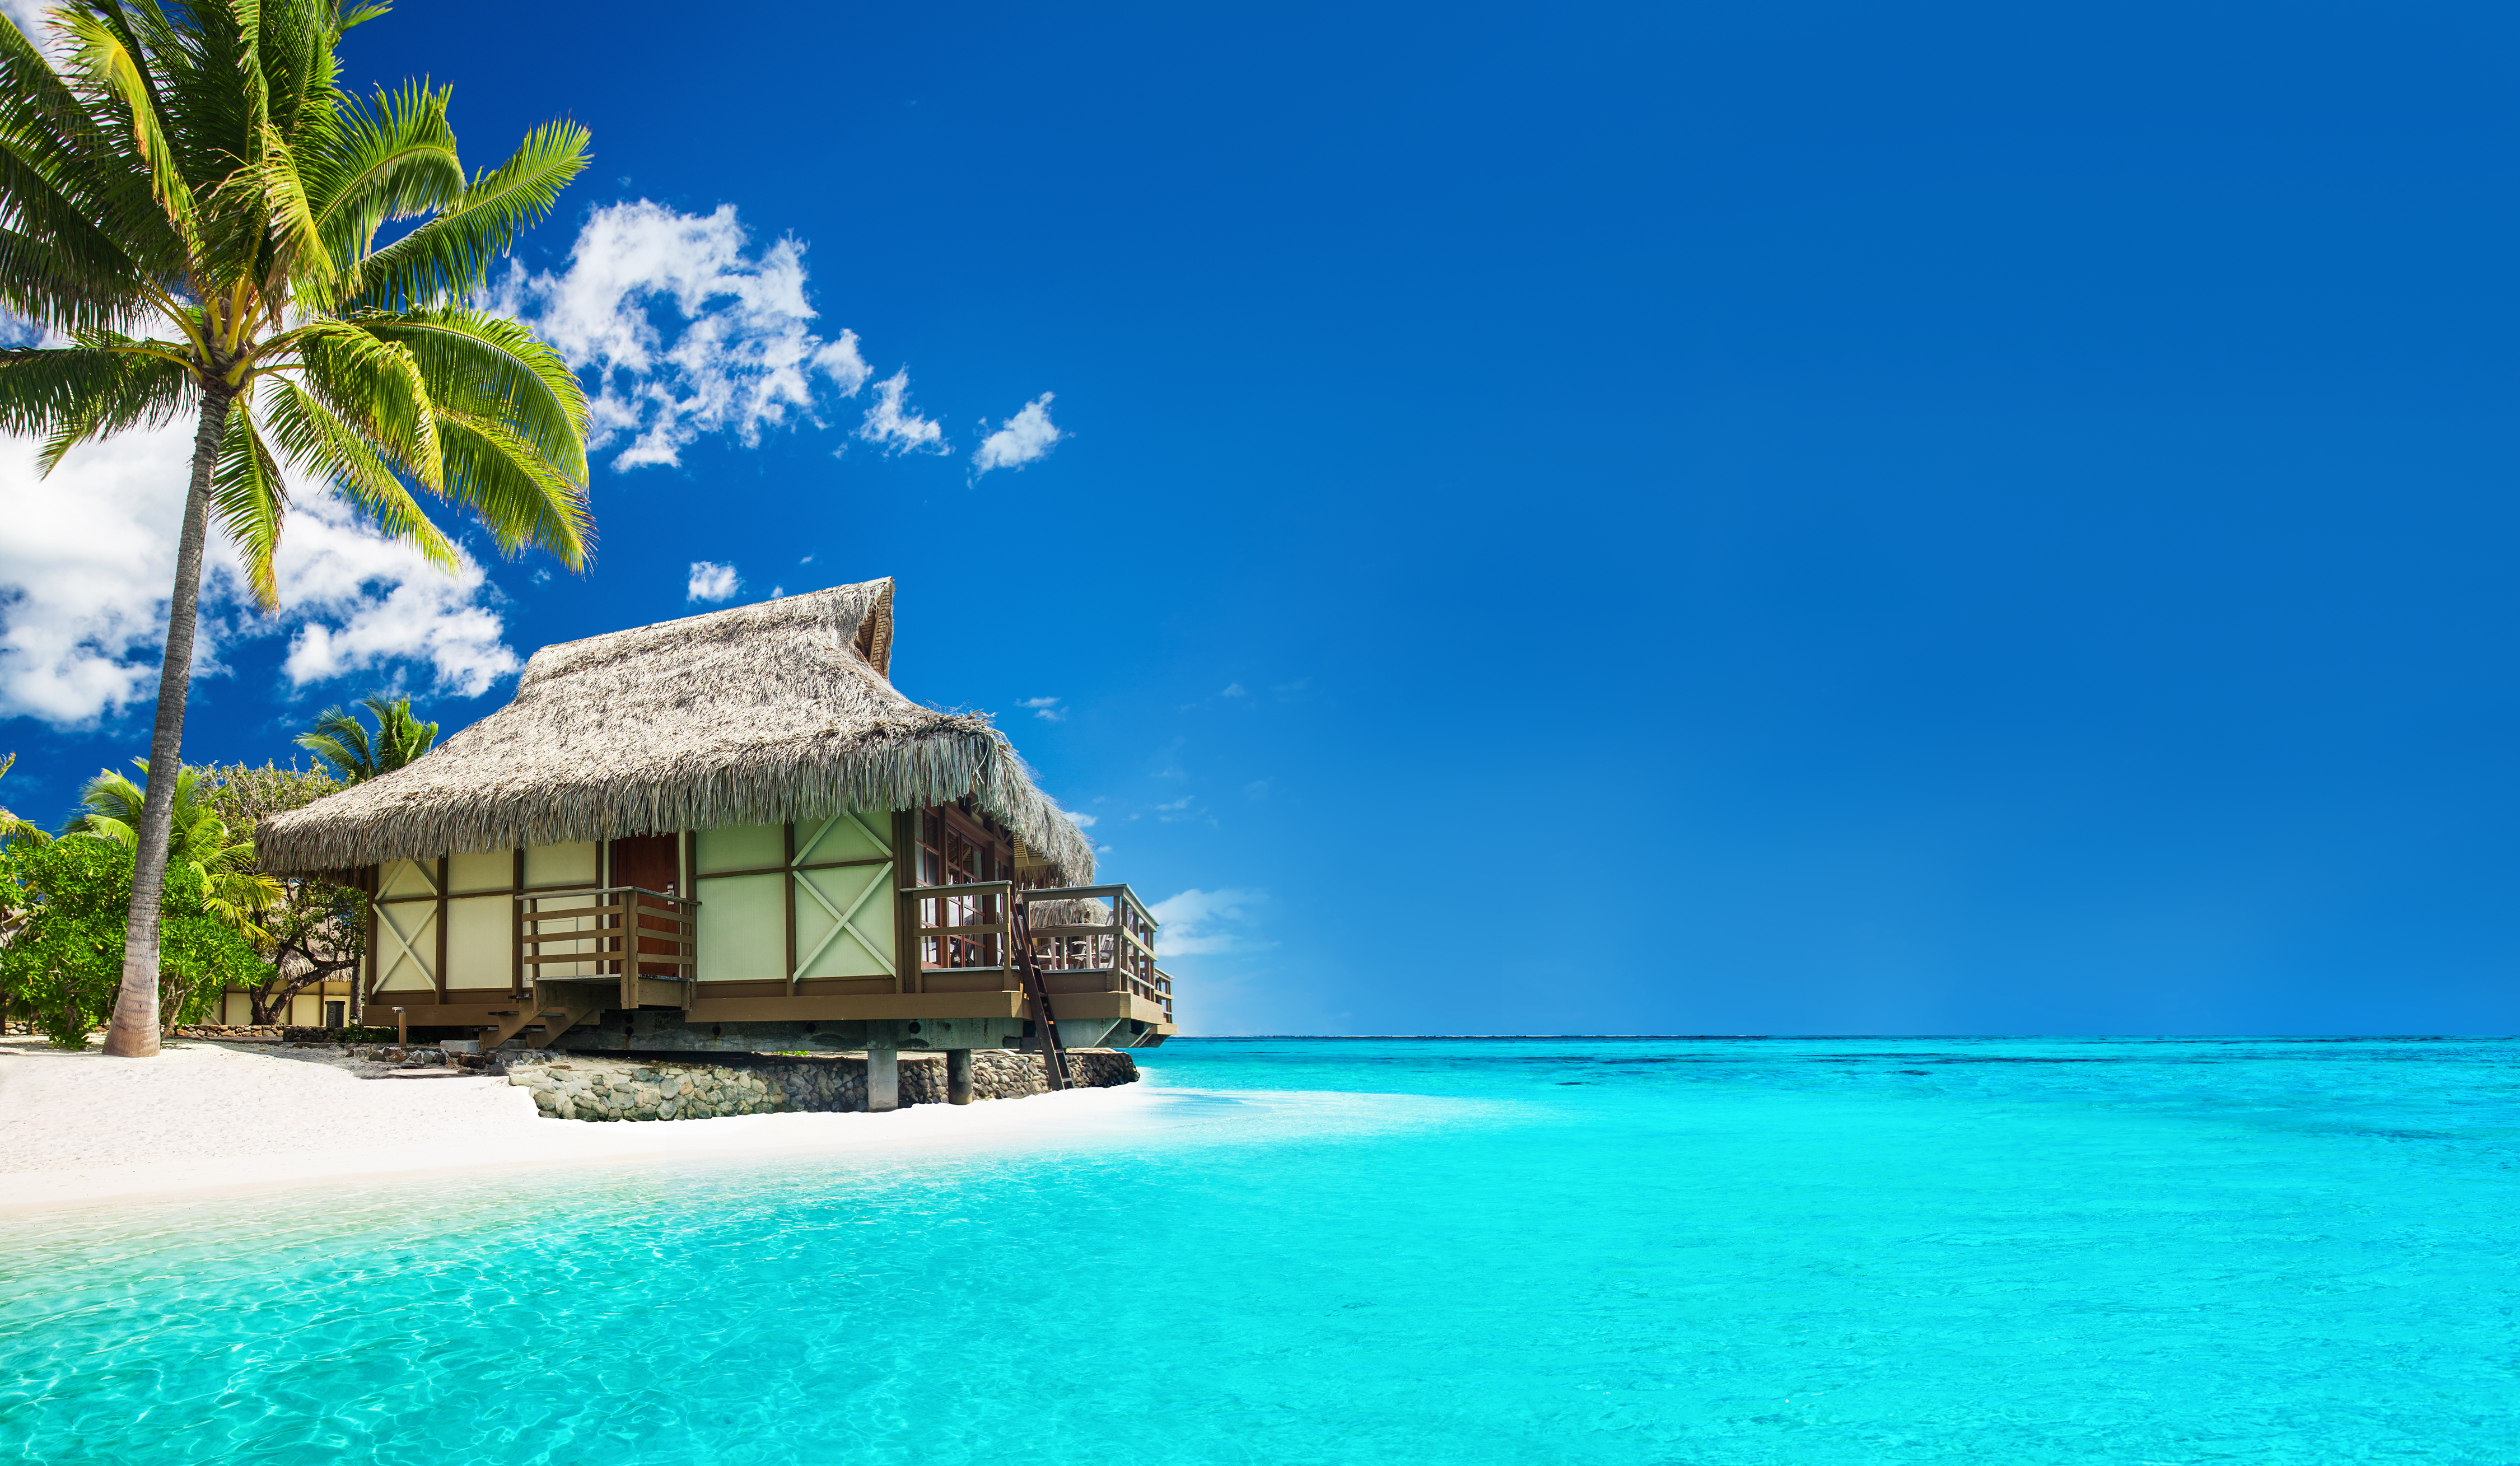 A tropical bungalow on the beach | Source: Shutterstock